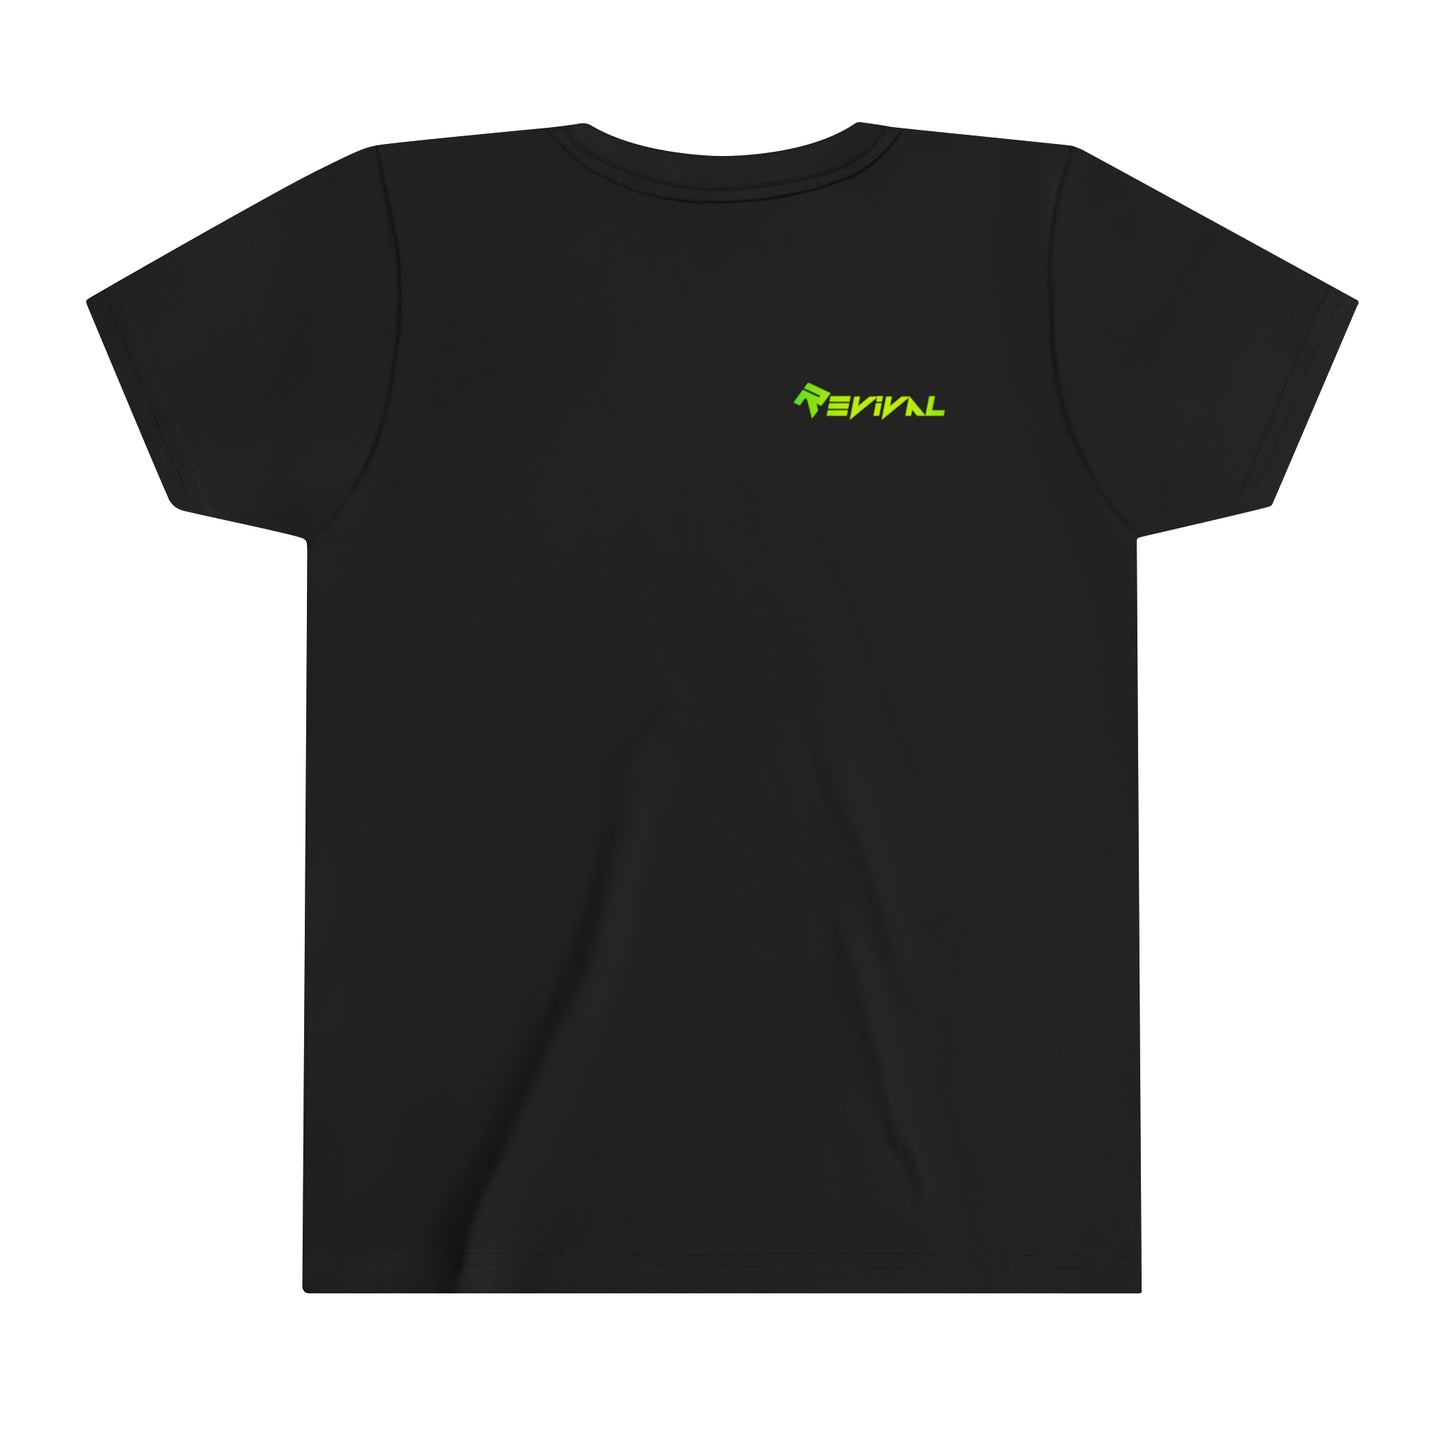 Pray for Revival Neon Green by Revival Youth Short Sleeve Tee